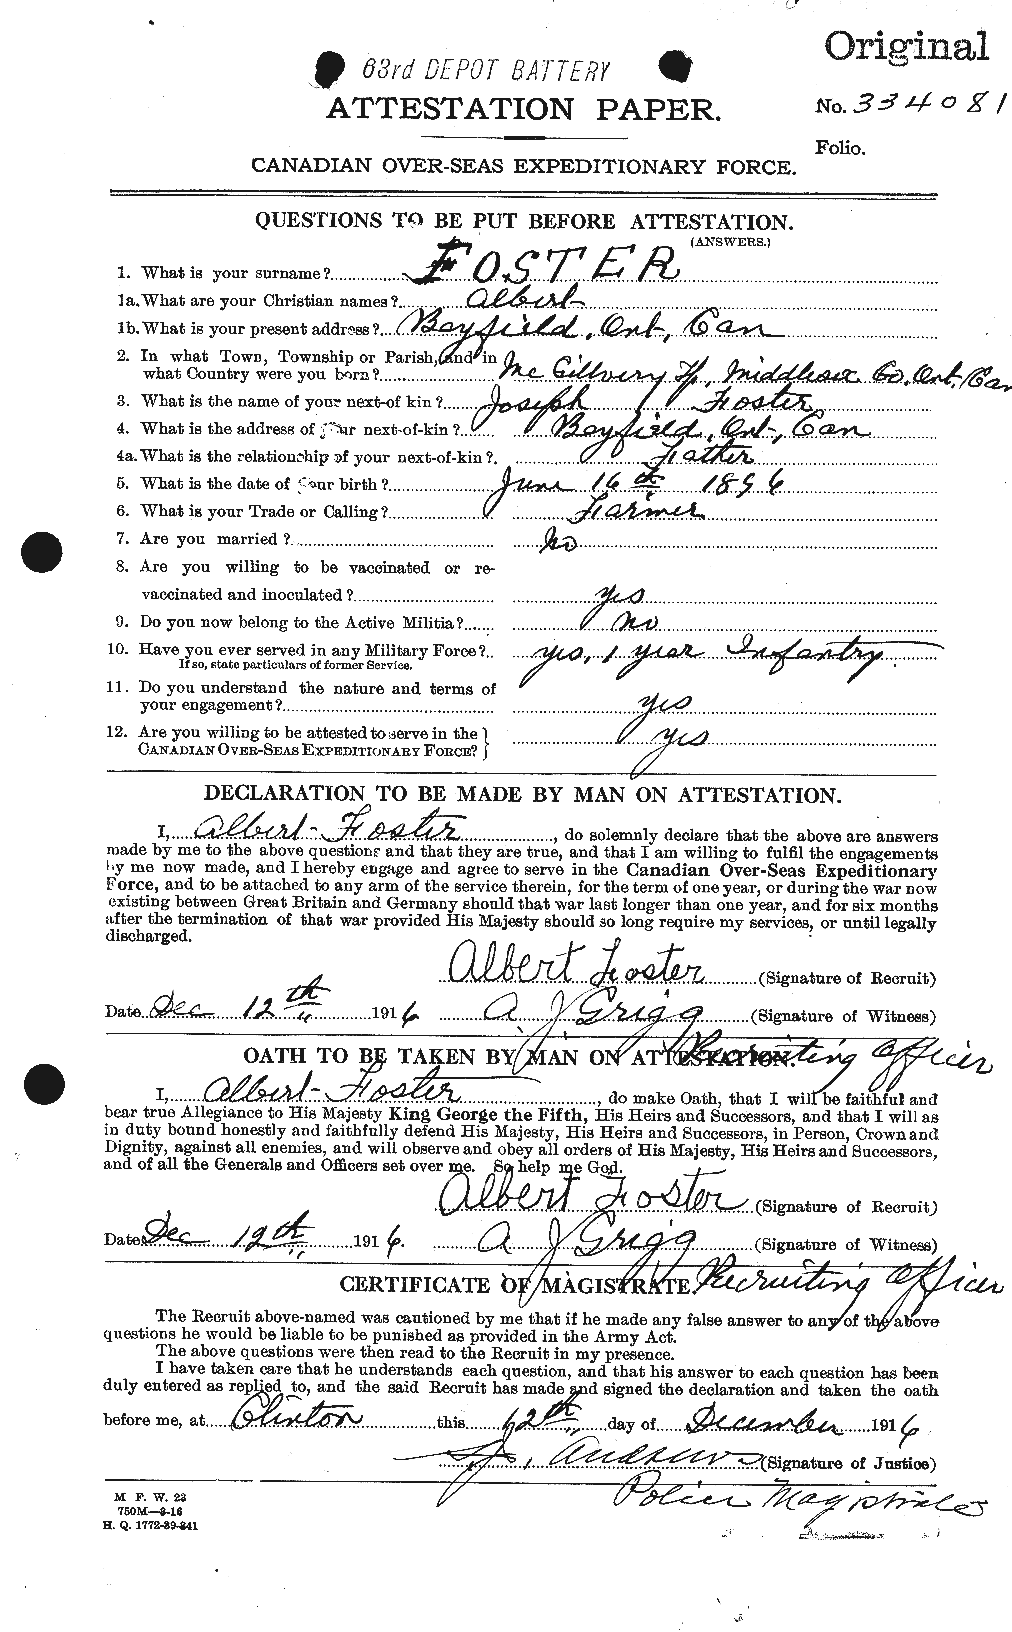 Personnel Records of the First World War - CEF 330429a